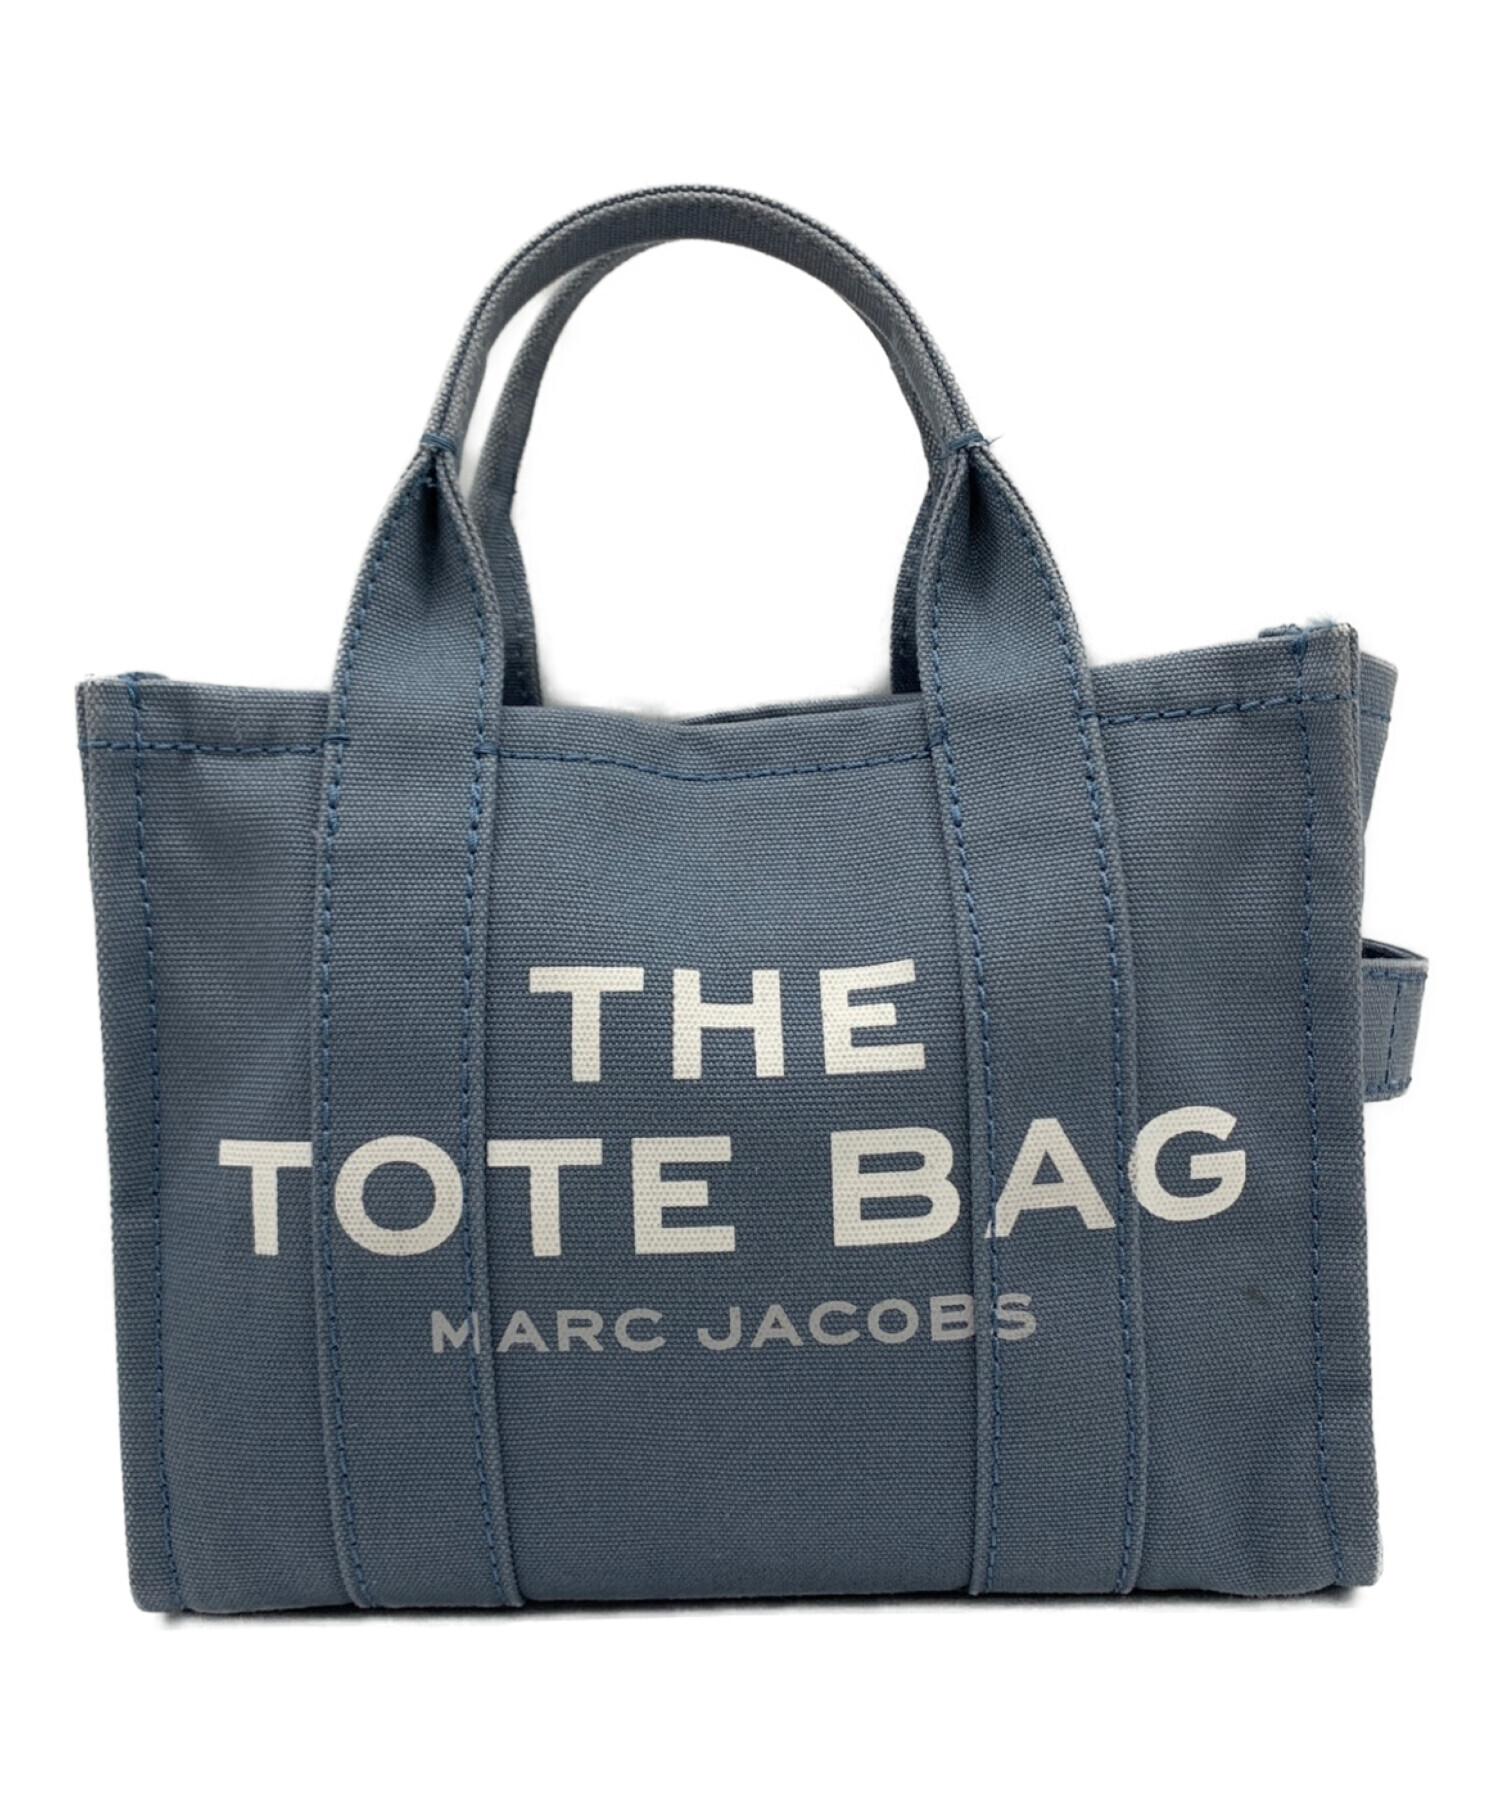 MARC BY MARCJACOBS 2wayトートバッグ